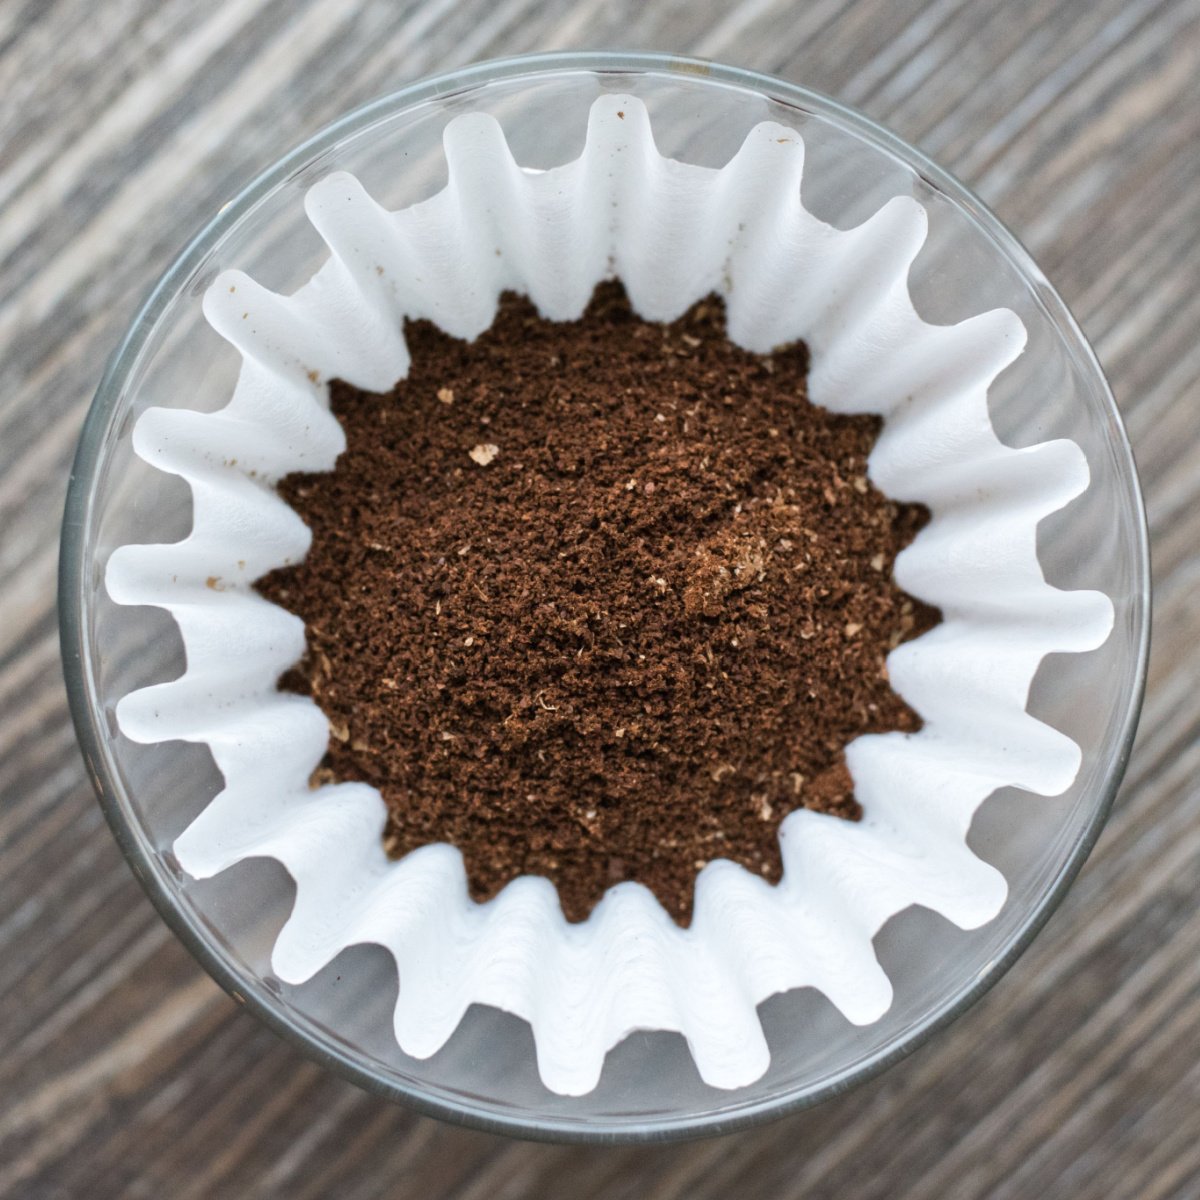 paper coffee filter filled with coffee grounds